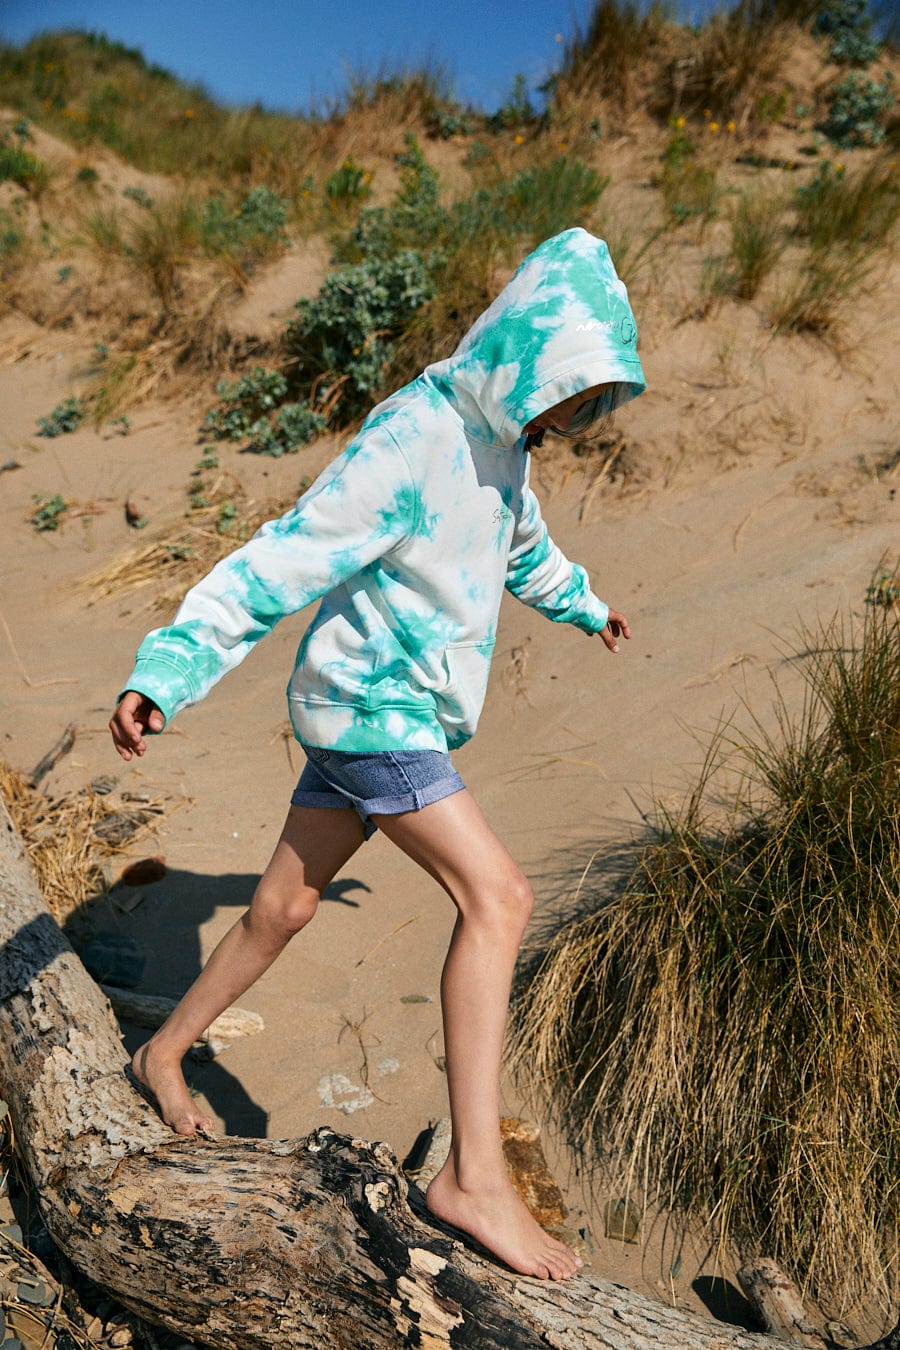 A person wearing a Saltrock Mermaid Surf - Kids Tie Dye Pop Hoodie - Turquoise/White and shorts walks barefoot on a sandy terrain with sparse vegetation and a fallen tree branch.